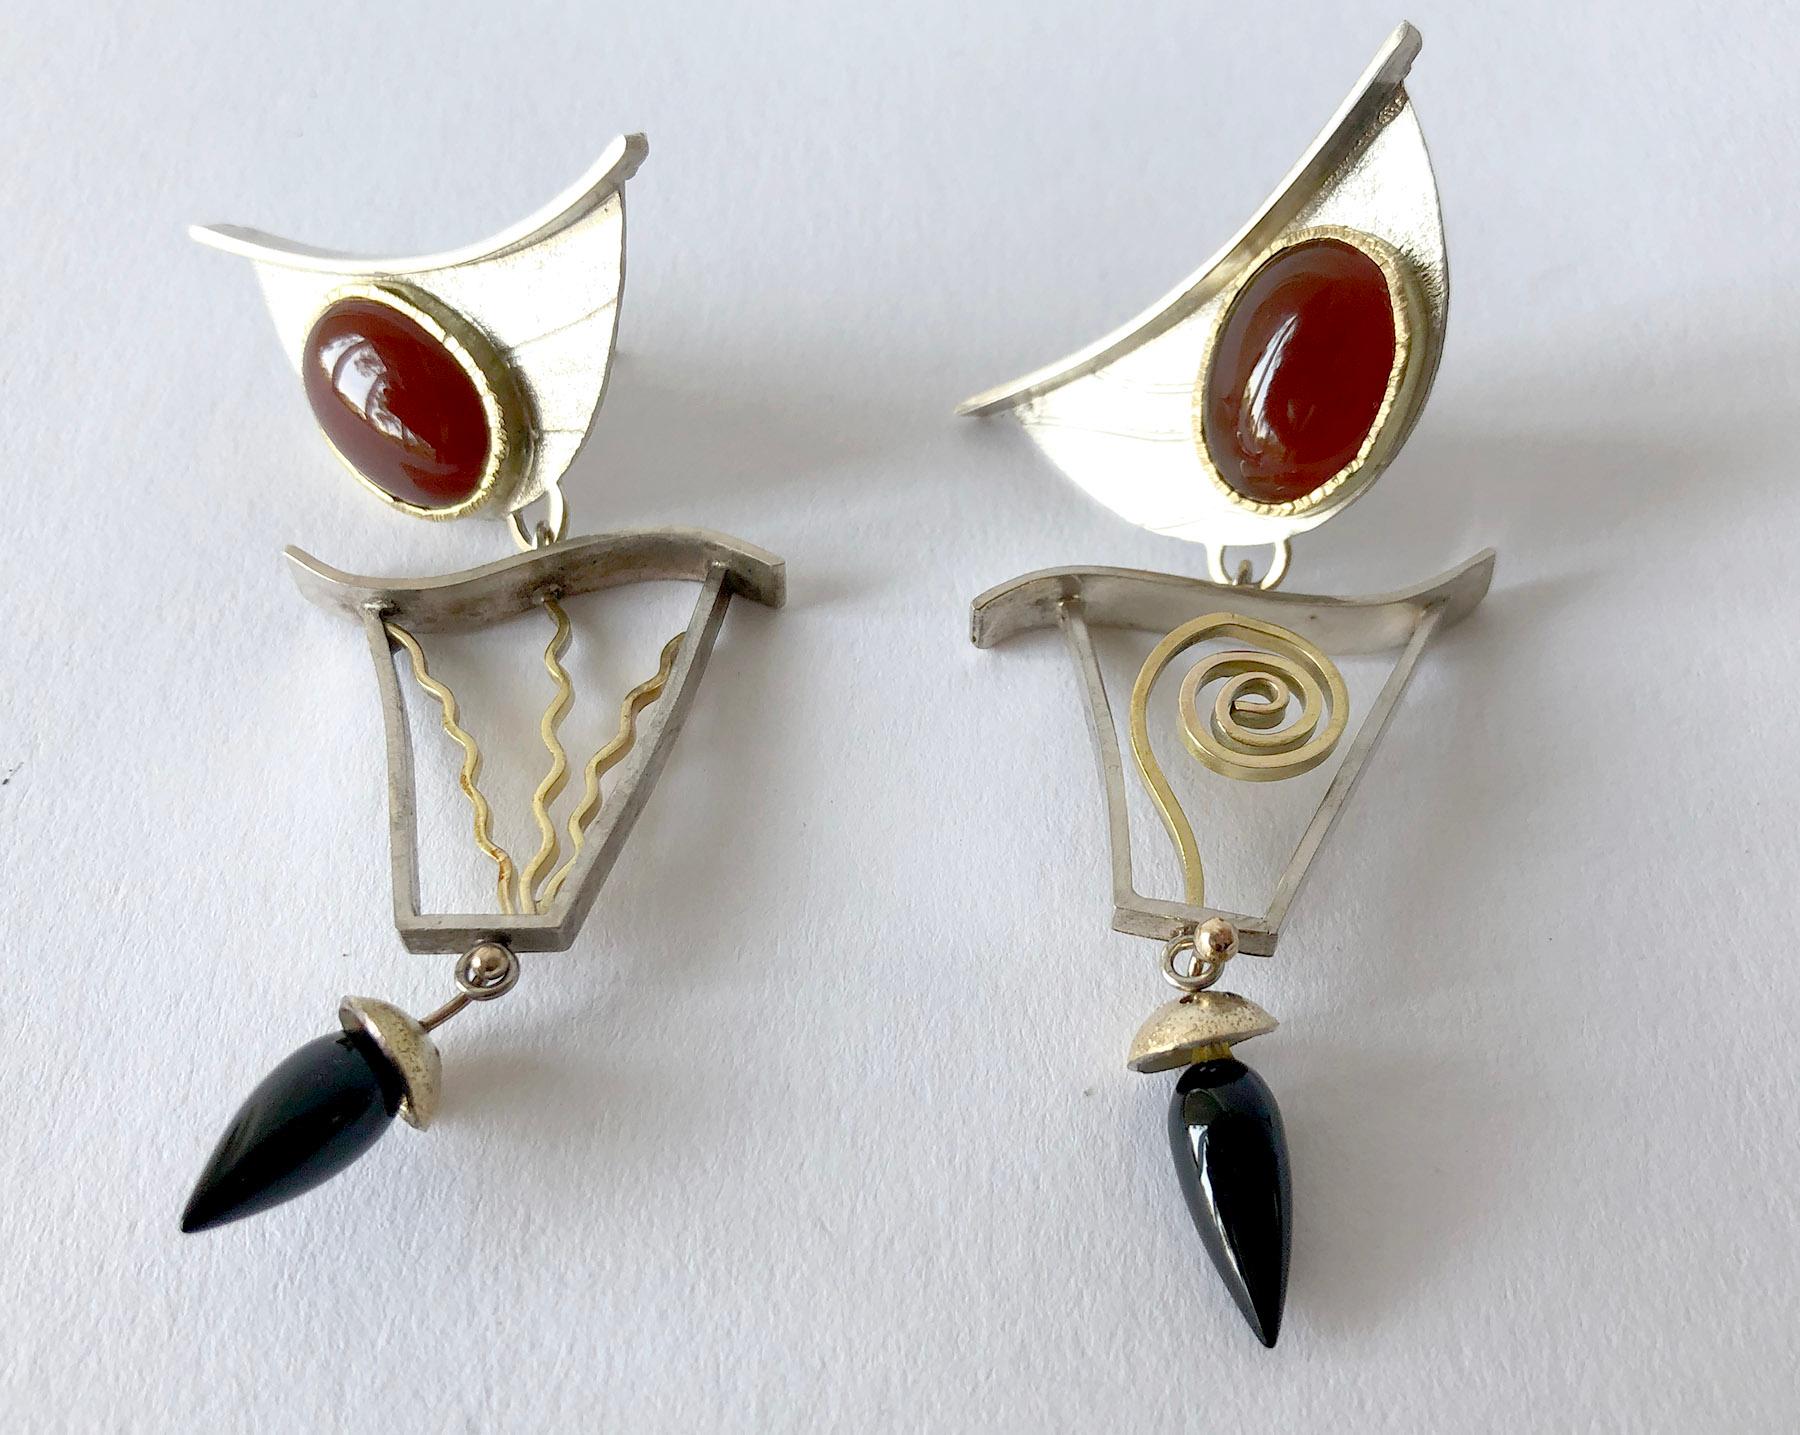 Hand made sterling silver, 14k gold, carnelian and onyx post modernist earrings created by artist and jeweler Enid Kaplan of New York City, New York.  Earrings are entitled 